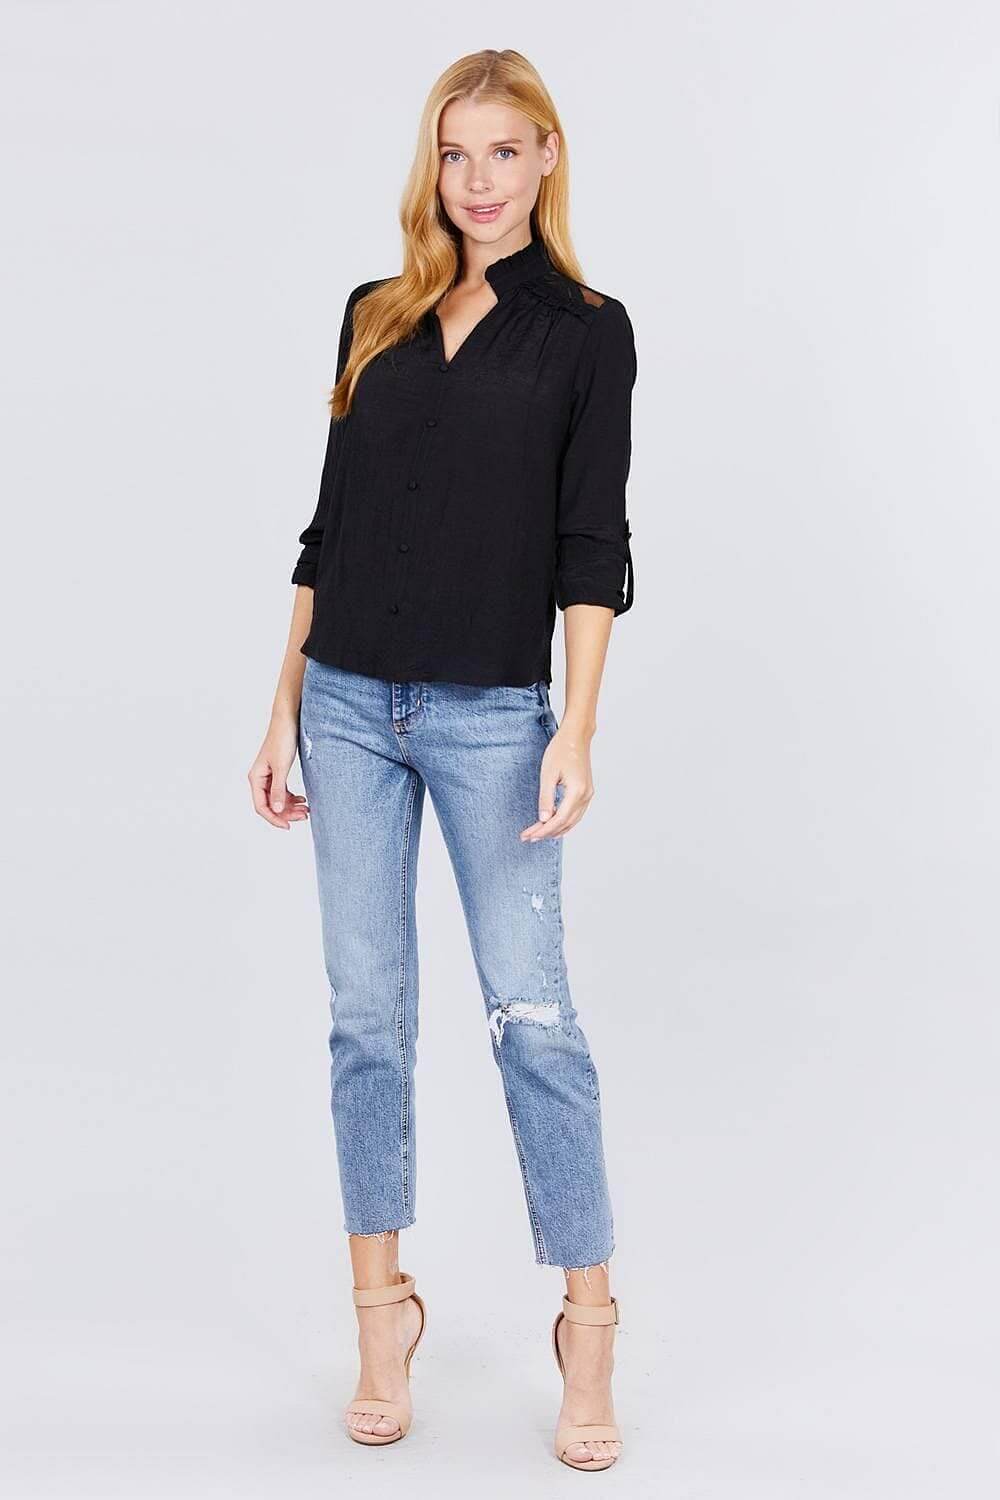 Black Long Sleeve V-Neck Button Down Top - Shopping Therapy, LLC Top